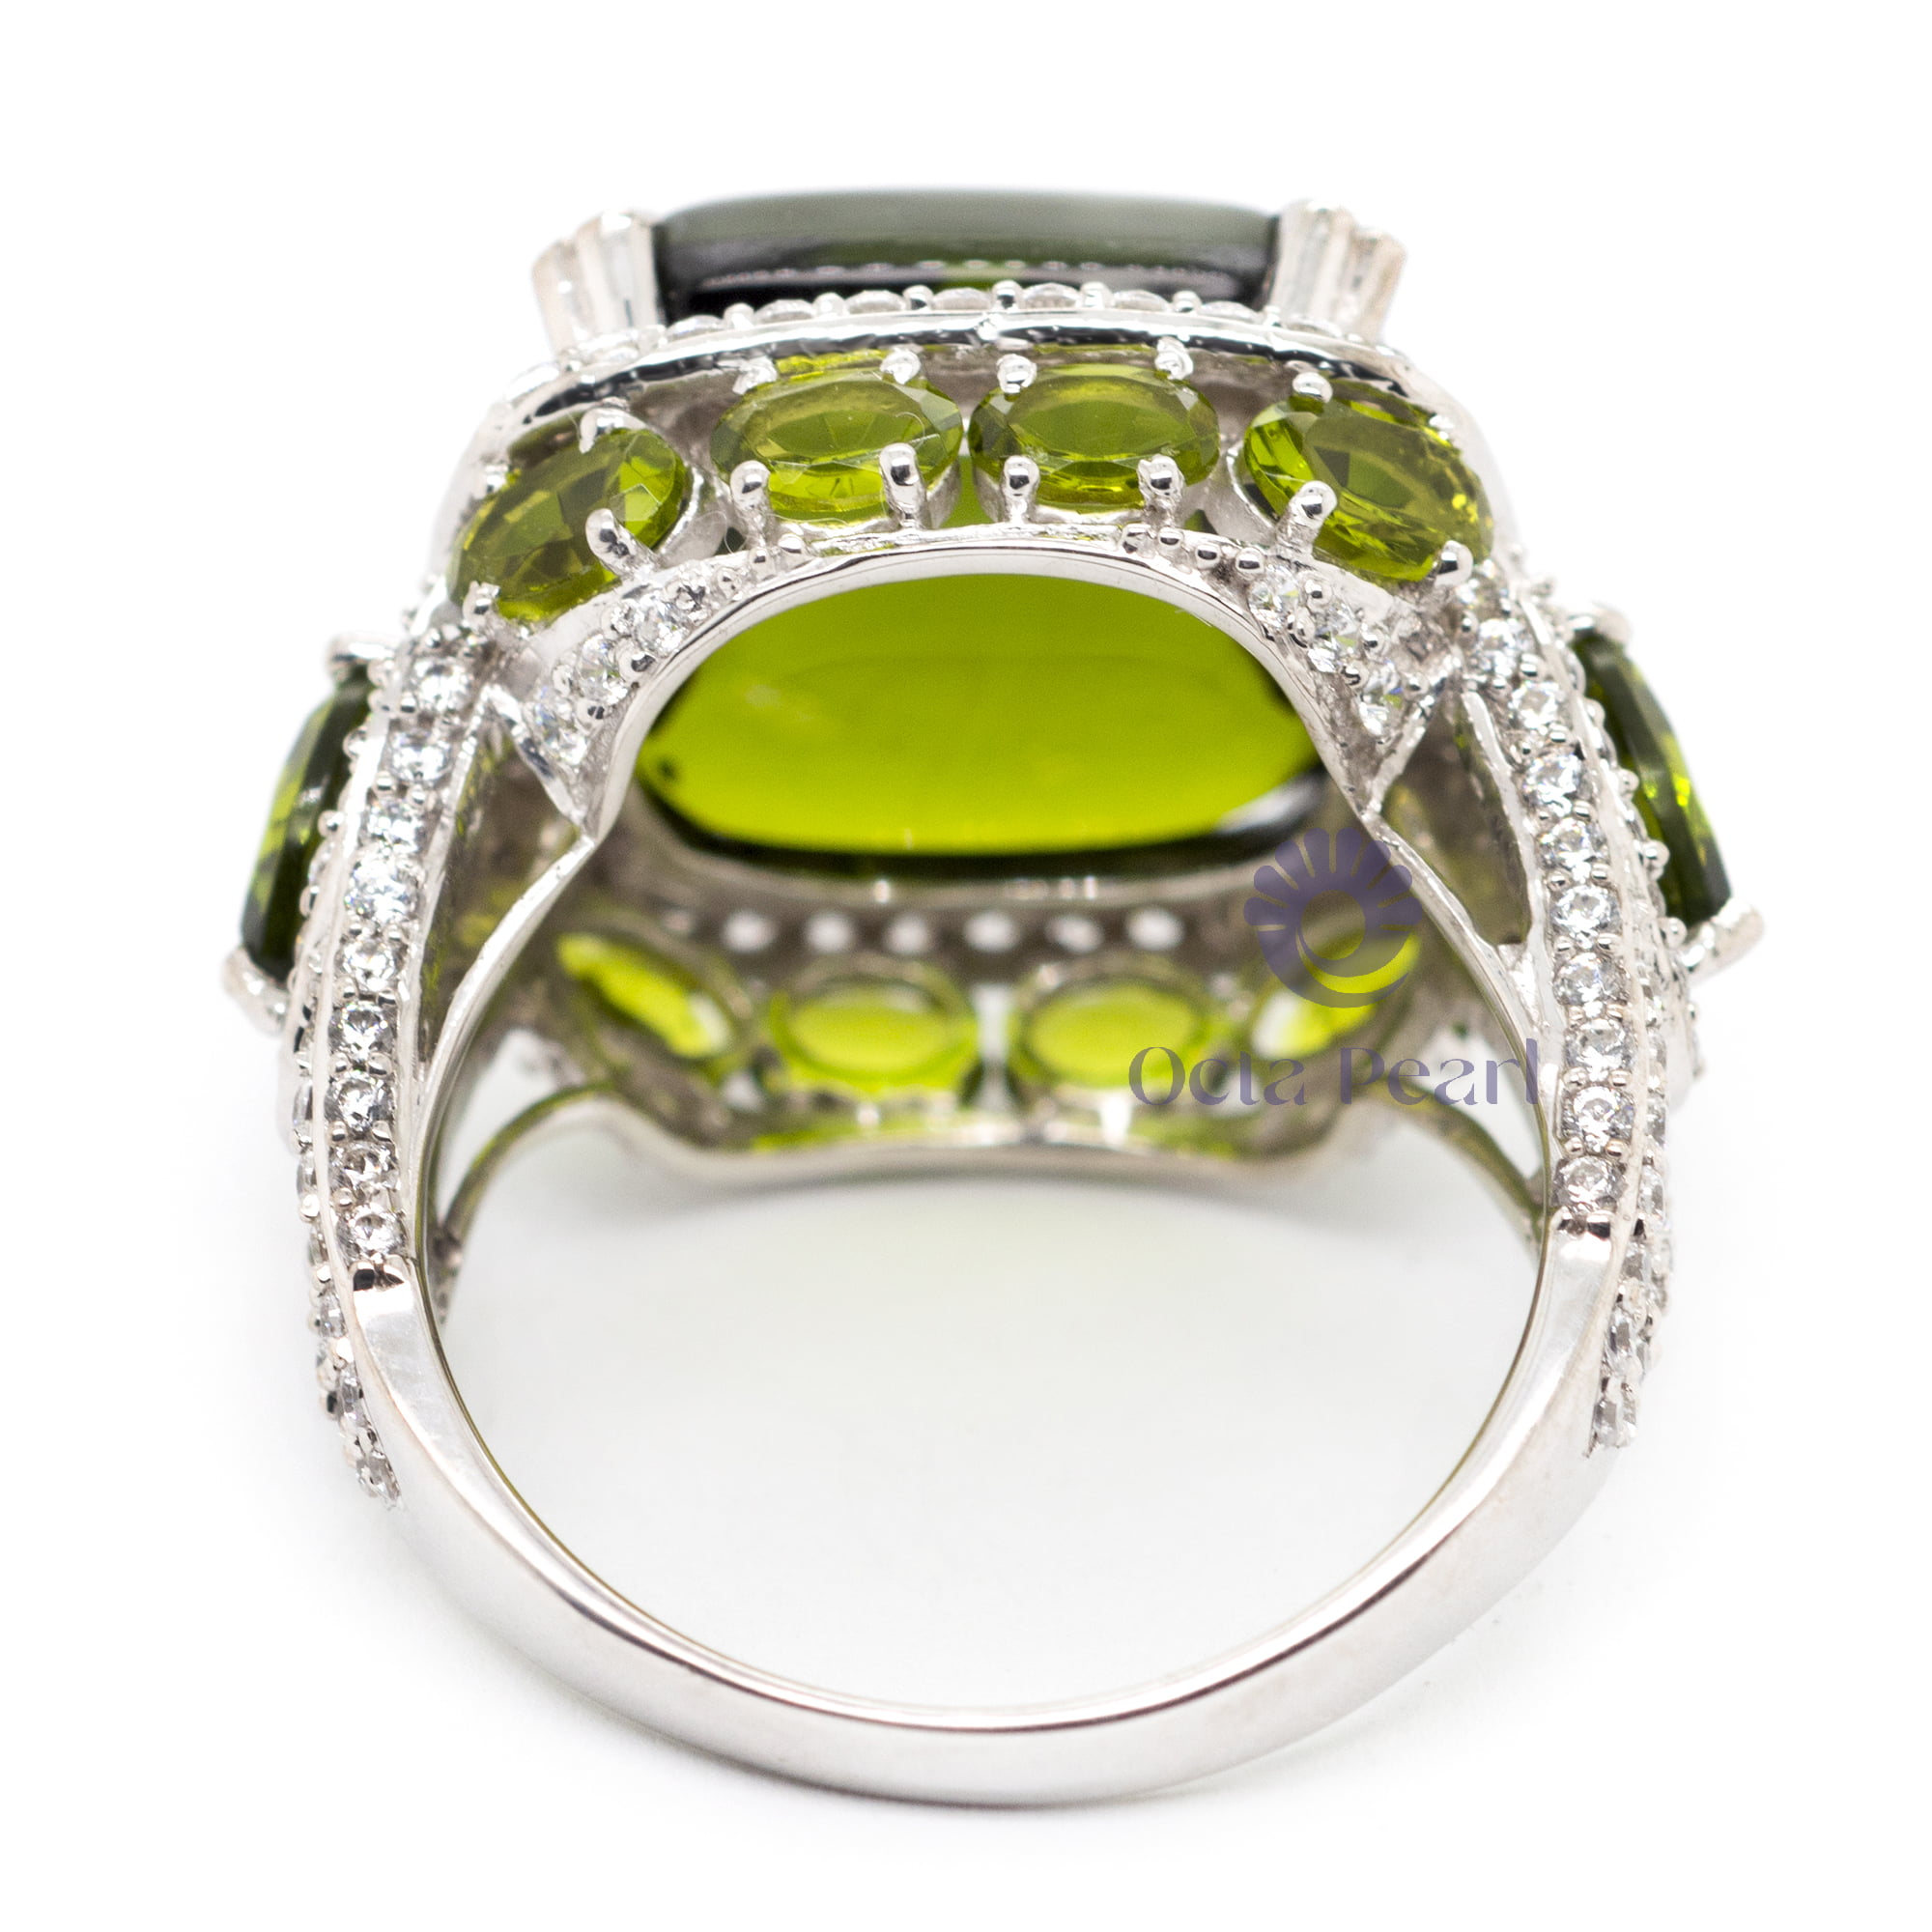 Peridot Color Fancy Cushion Shape Cabochon With Pear Cut CZ Stone Three Stone Halo Cocktail Ring